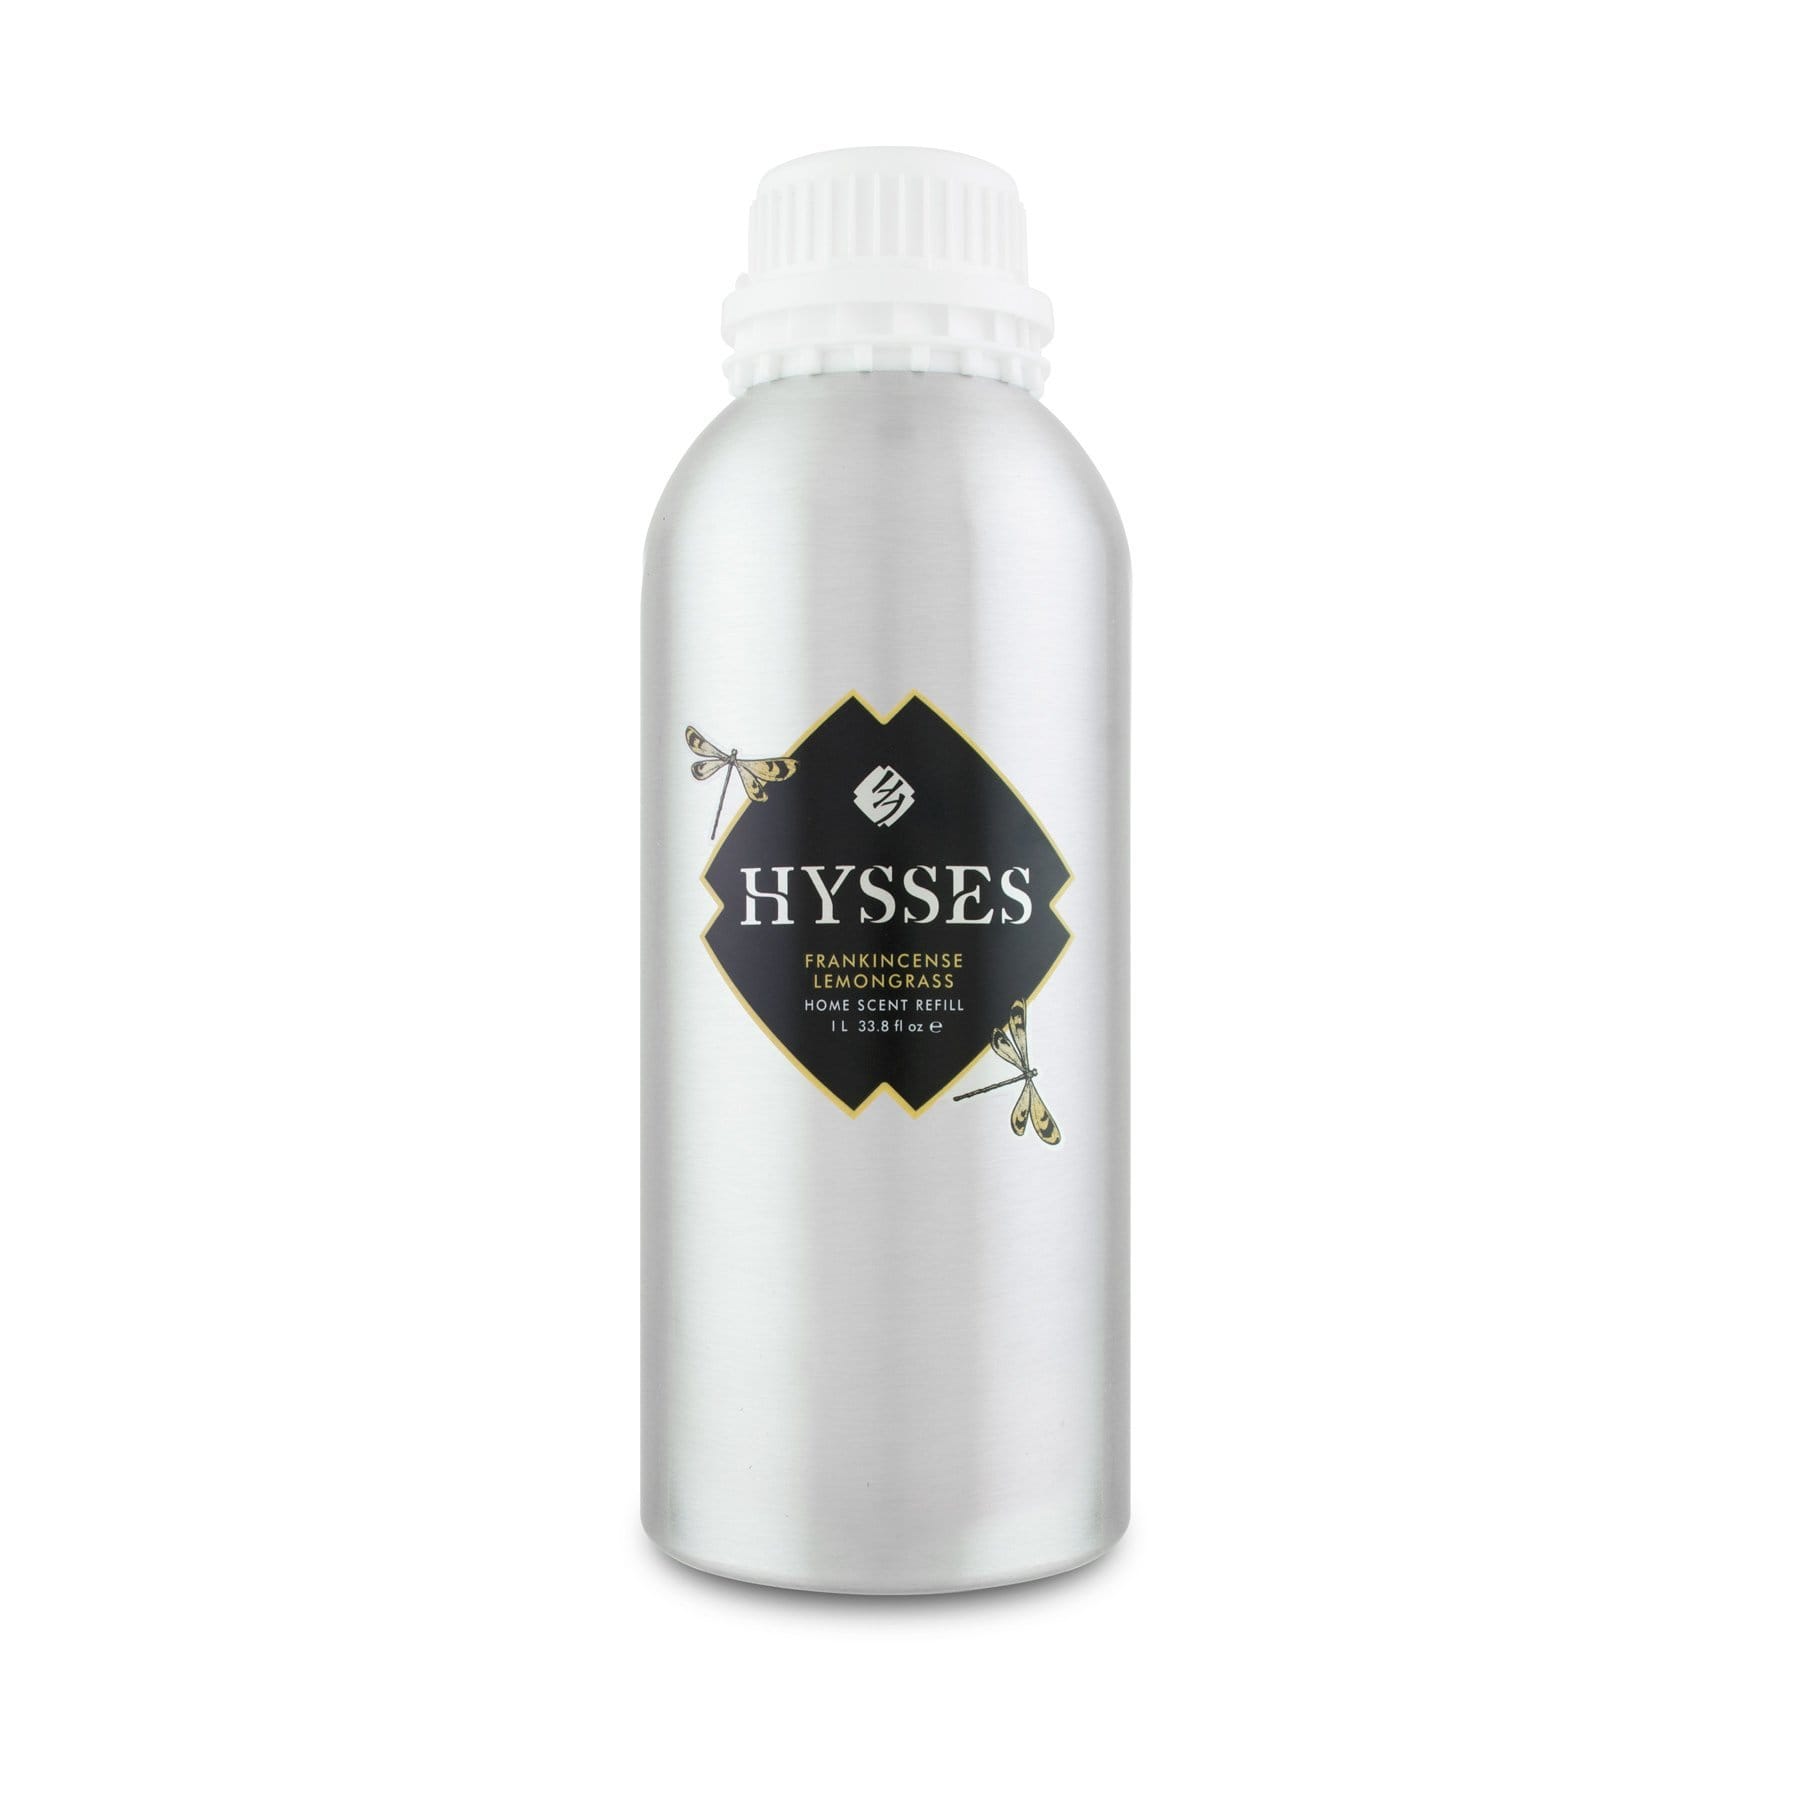 Hysses Home Scents 500ml Refill Home Scent Frankincense Lemongrass